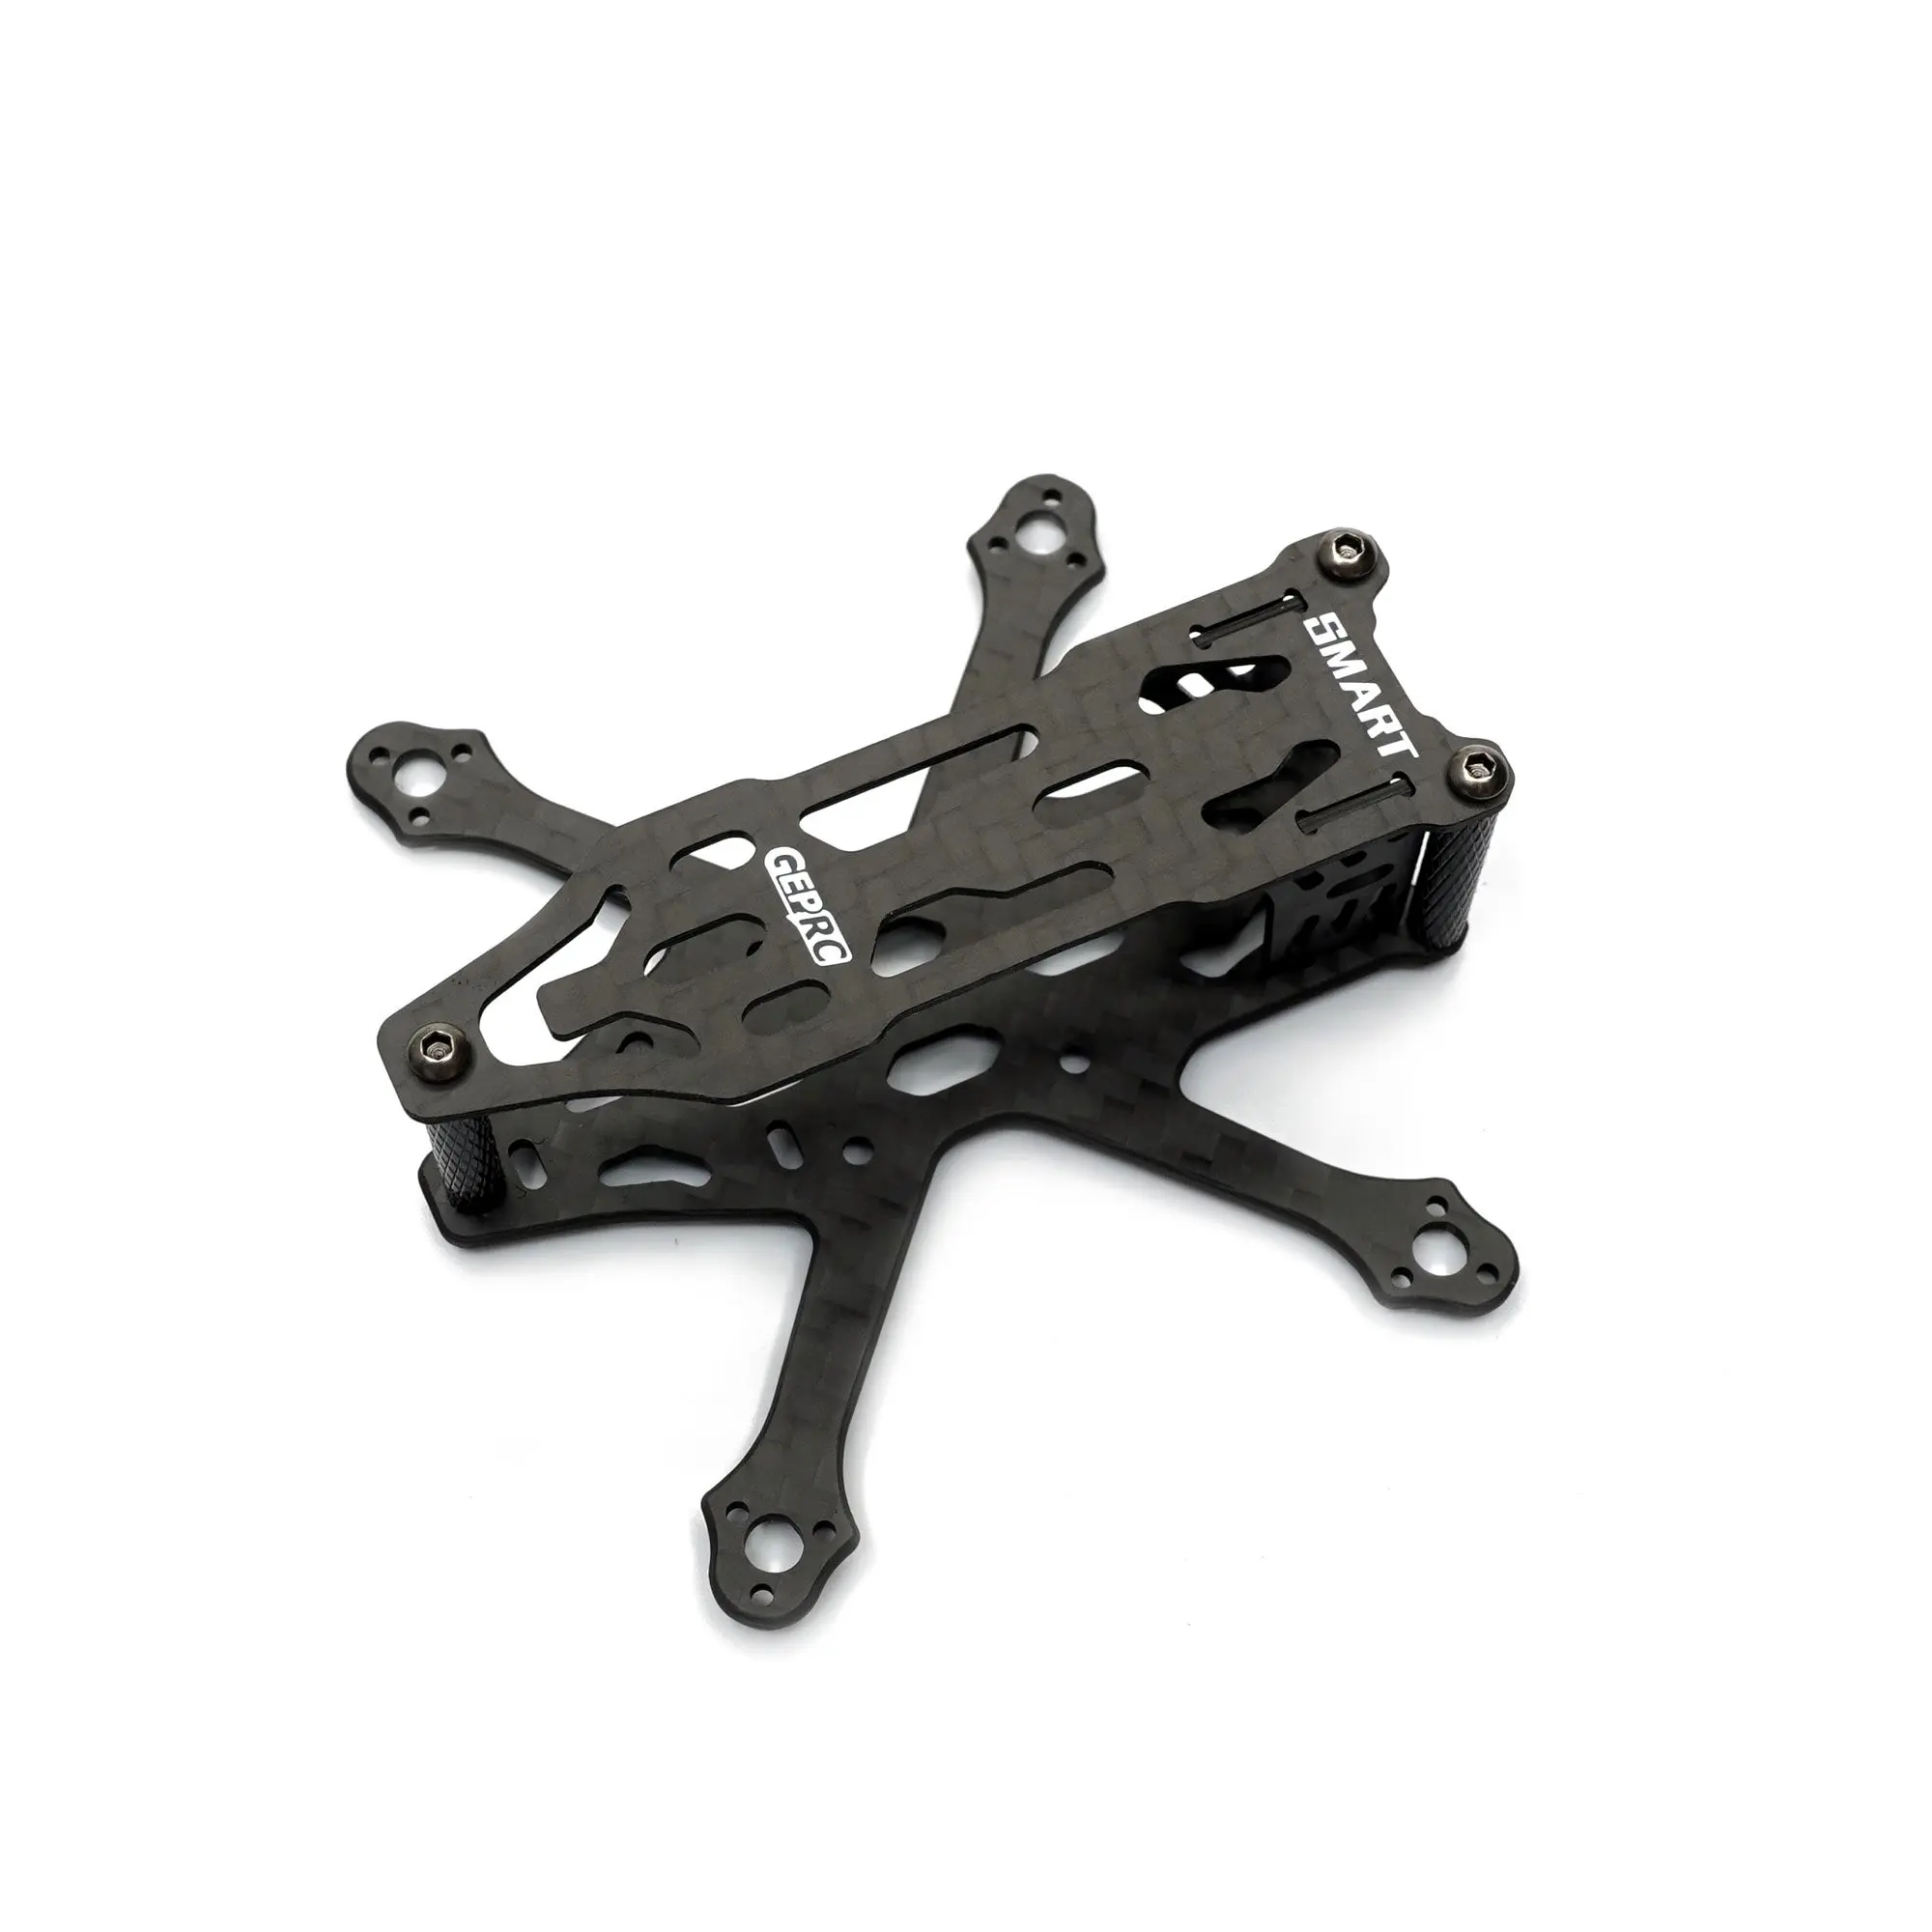 

GEPRC GEP-ST16 Frame Suitable For SMART16 Drone Carbon Fiber Frame For DIY RC FPV Quadcopter Freesryle Drone Accessories Parts